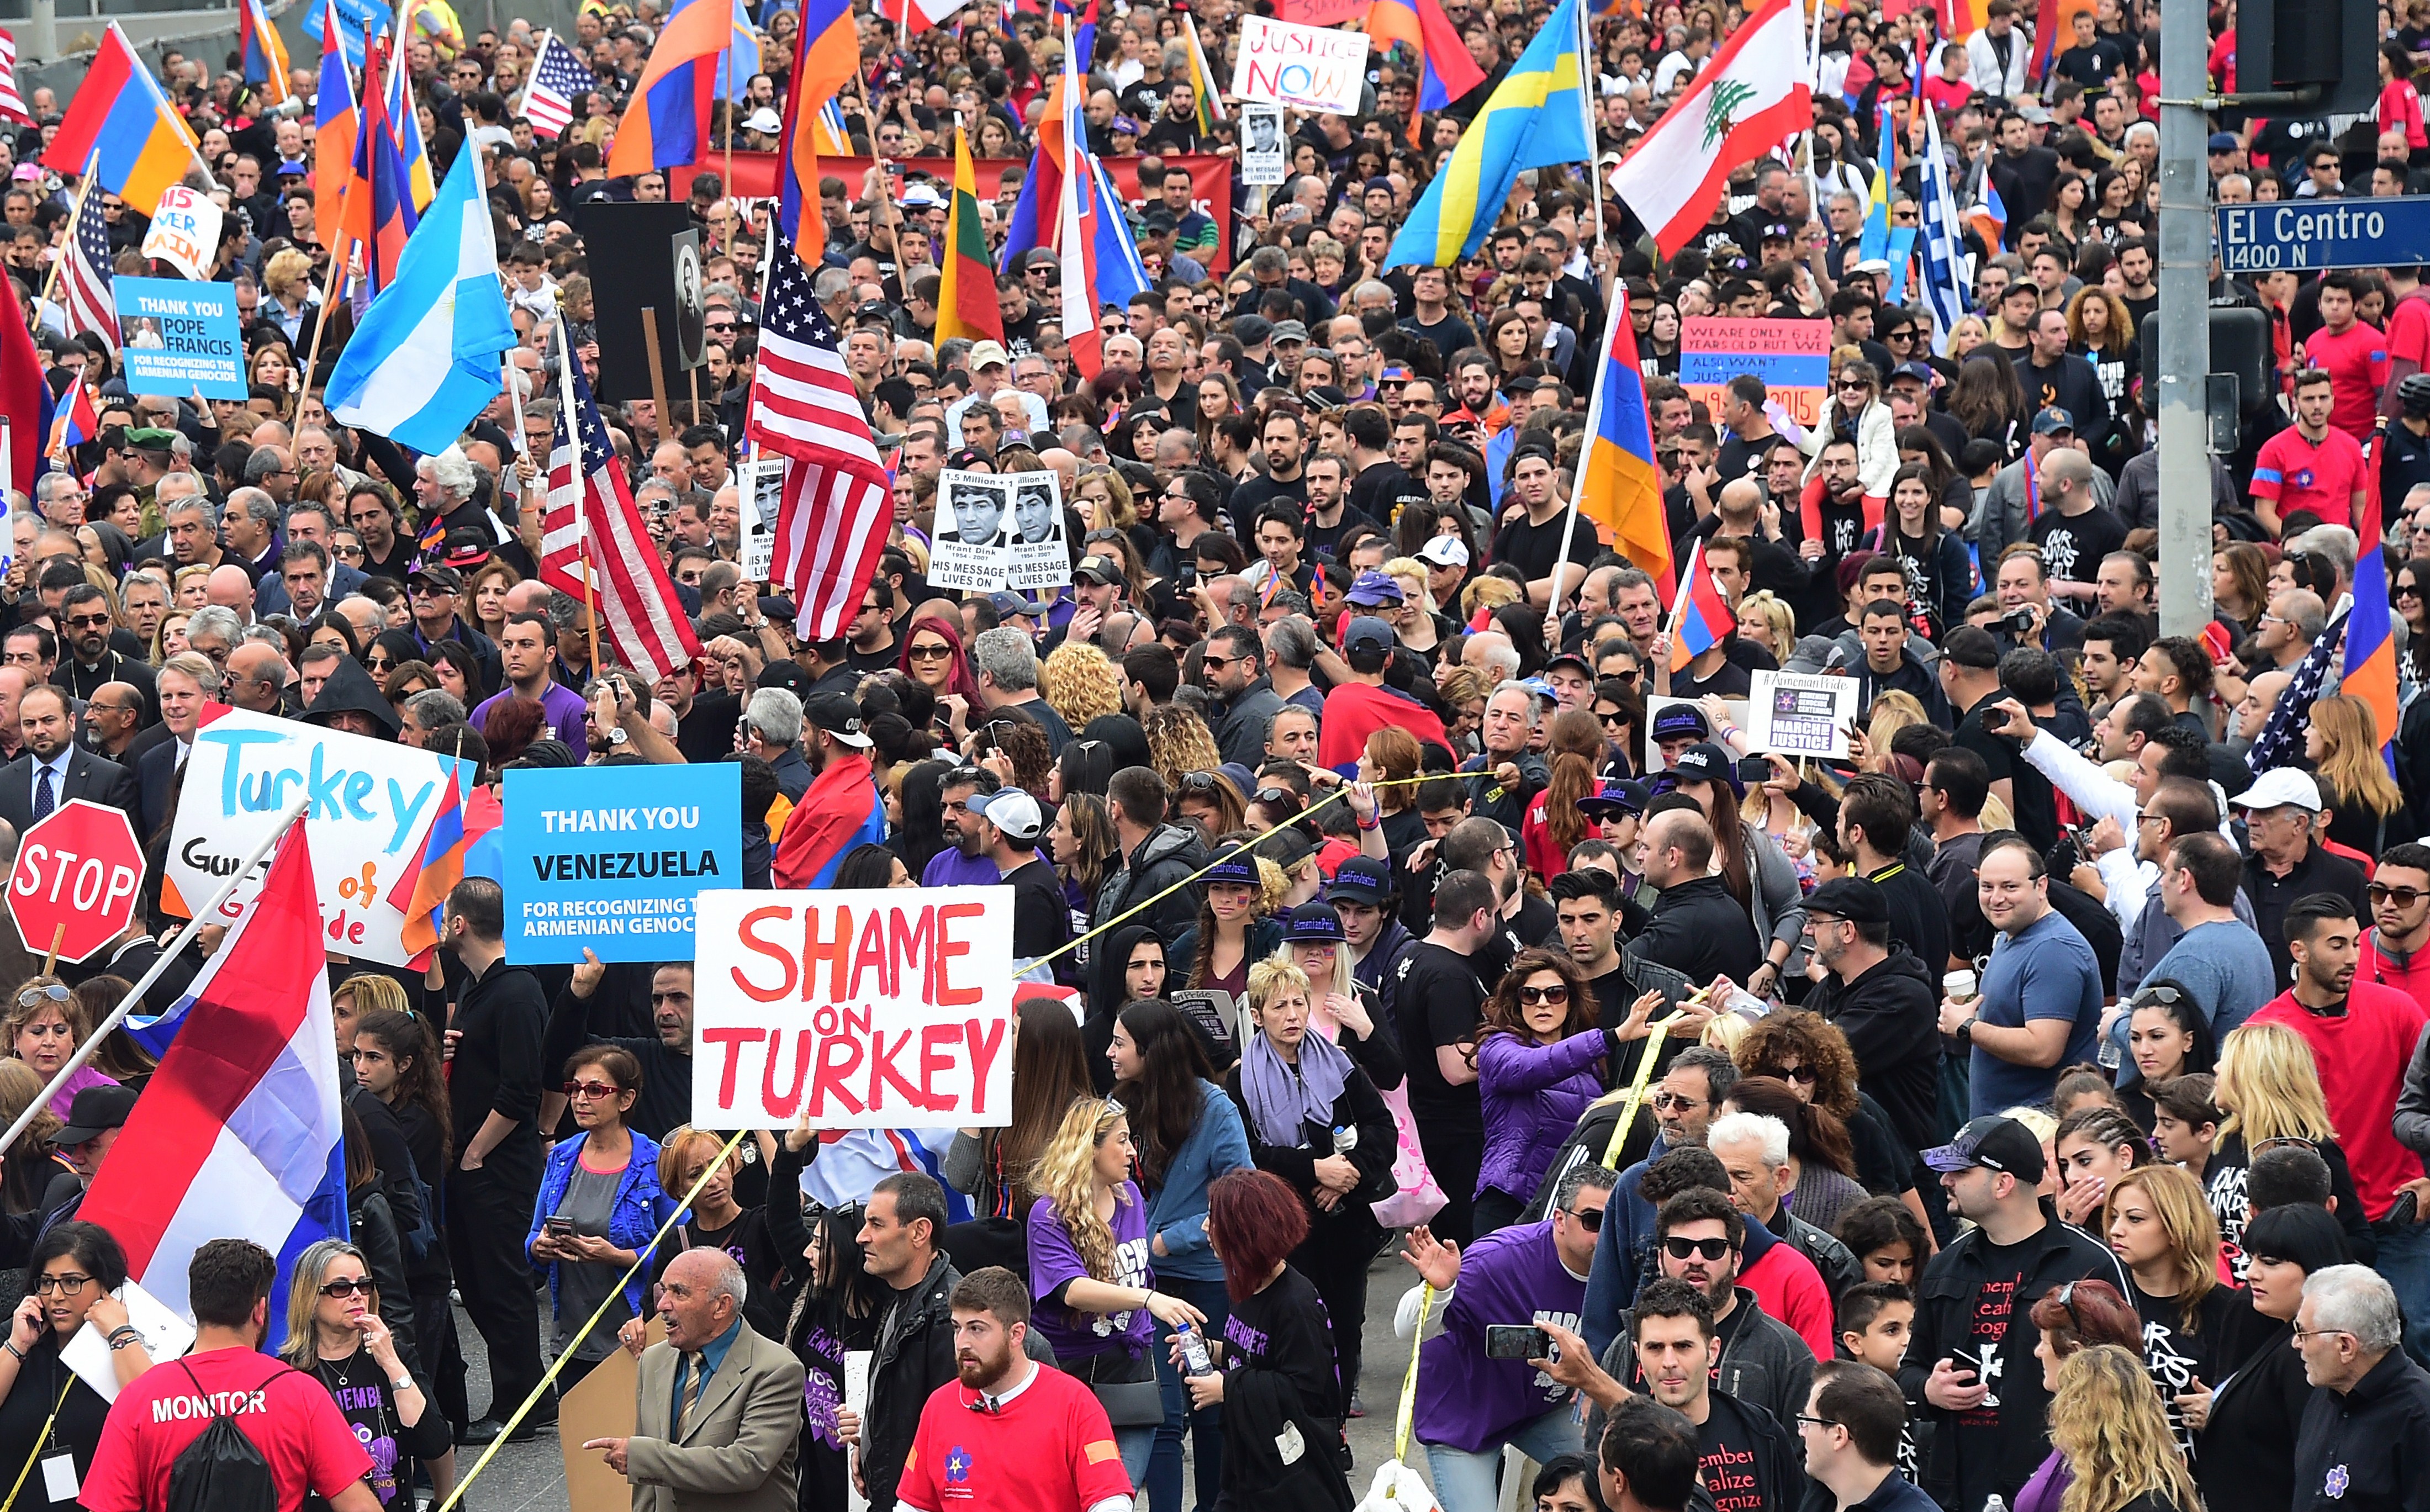 Tens of thousands of Armenian Americans take to the streets of Los Angeles on April 24, 2015, to march for justice and in memory of victims of the Armenian genocide. The event marks the centenary of the massacre of some 1.5 million Armenians by Ottoman forces.